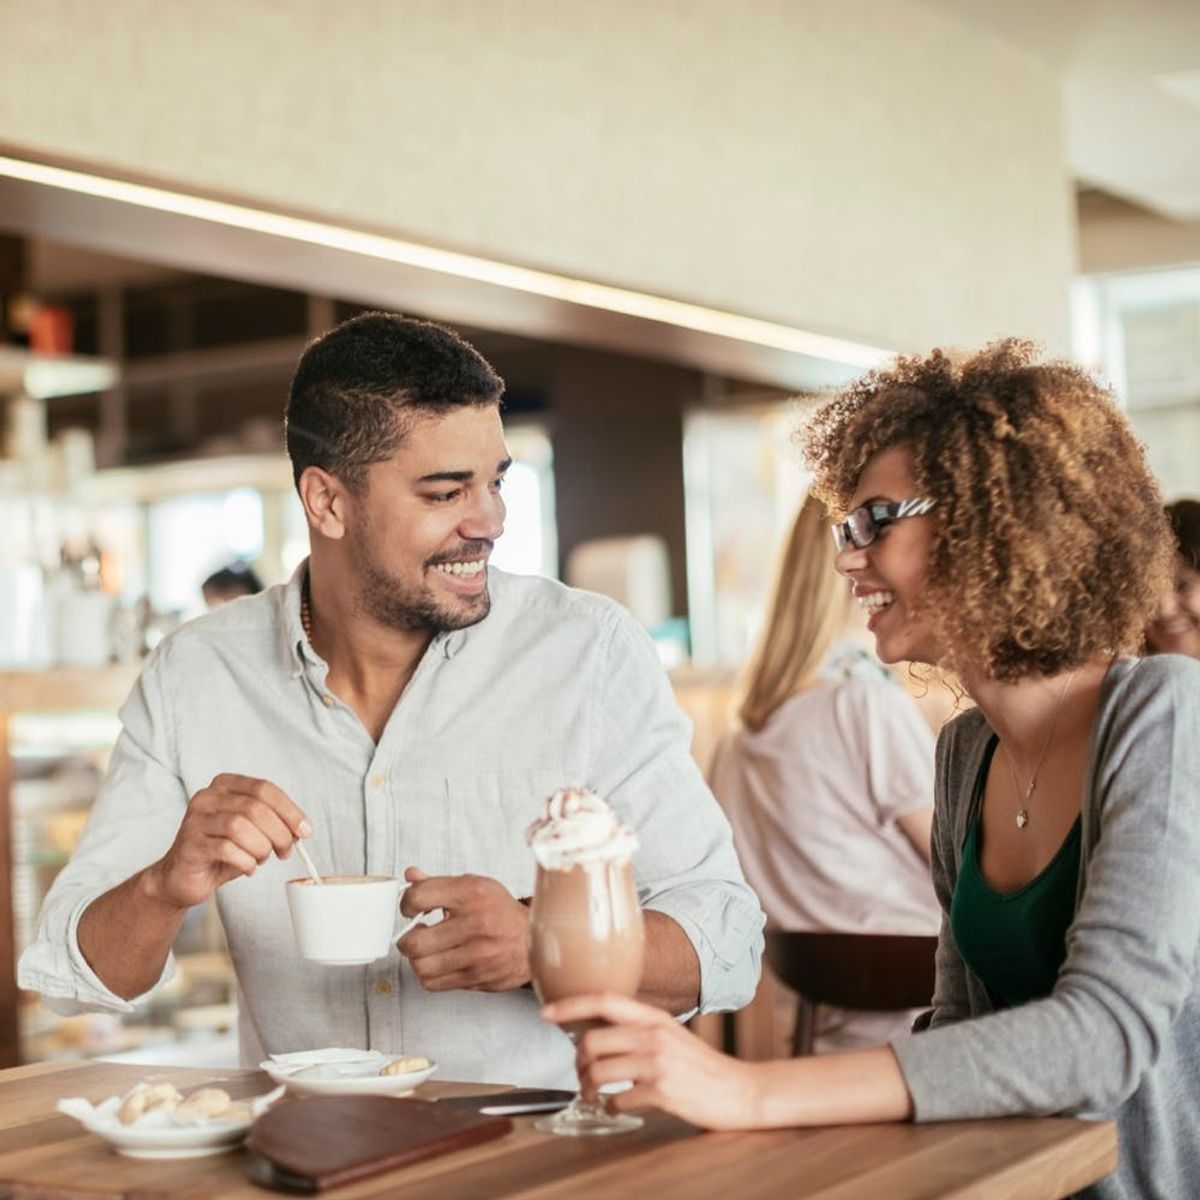 What You Say on a Date Can Make You More Attractive